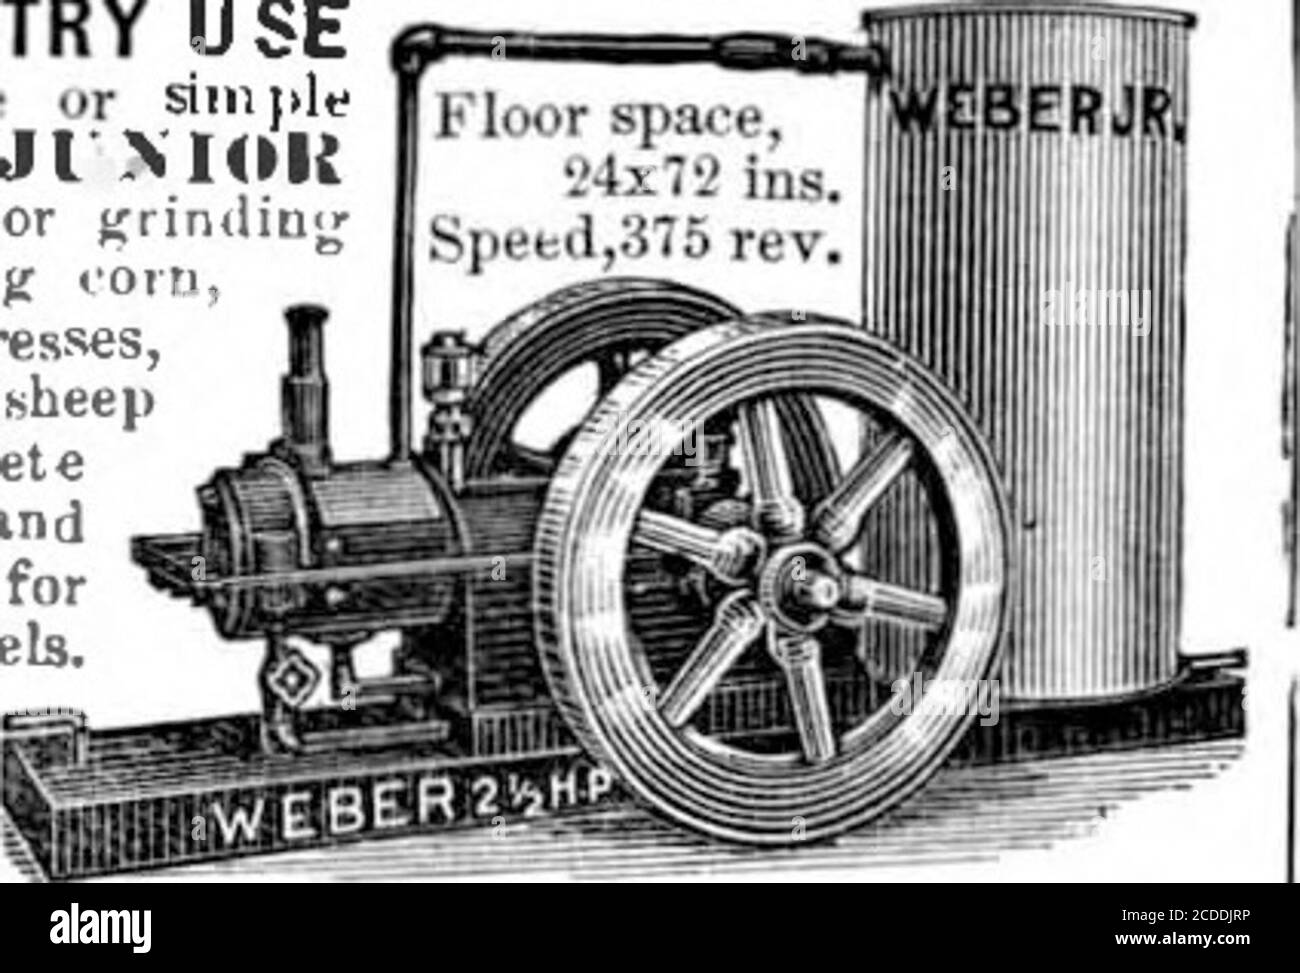 . Scientific American Volume 86 Number 14 (April 1902) . MACHINE WORK WANTED Have your Model** of Engine** etc., made, and smallMachine Work done in a thoroughly equipped ma-chine shop. Estimates cheerfully given.II. BAICTOL BKA/IKR, Engineer and Machinist, Manufacturer of Gasoline Vehicles, 1811.18.10 Fltzuater Street, Philadelphia, Pa. MILLS F0RALLMATER1ALS. OUR BUSINESS IS TO MAKEMACHINERY FOR GRINDINGGRAIN, CRUSHING ROCKS ANDPULVERIZING ALL HARD SUB-STANCES. WE HANDLE ALLKINDS OF MATERIALS FROM COT-TON-SEED TO ROOTS AND HERBS. BY AN UNEXCELLED PRO- *««eESS. IF YOU WANTH **??•? ANY KIND OF Stock Photo